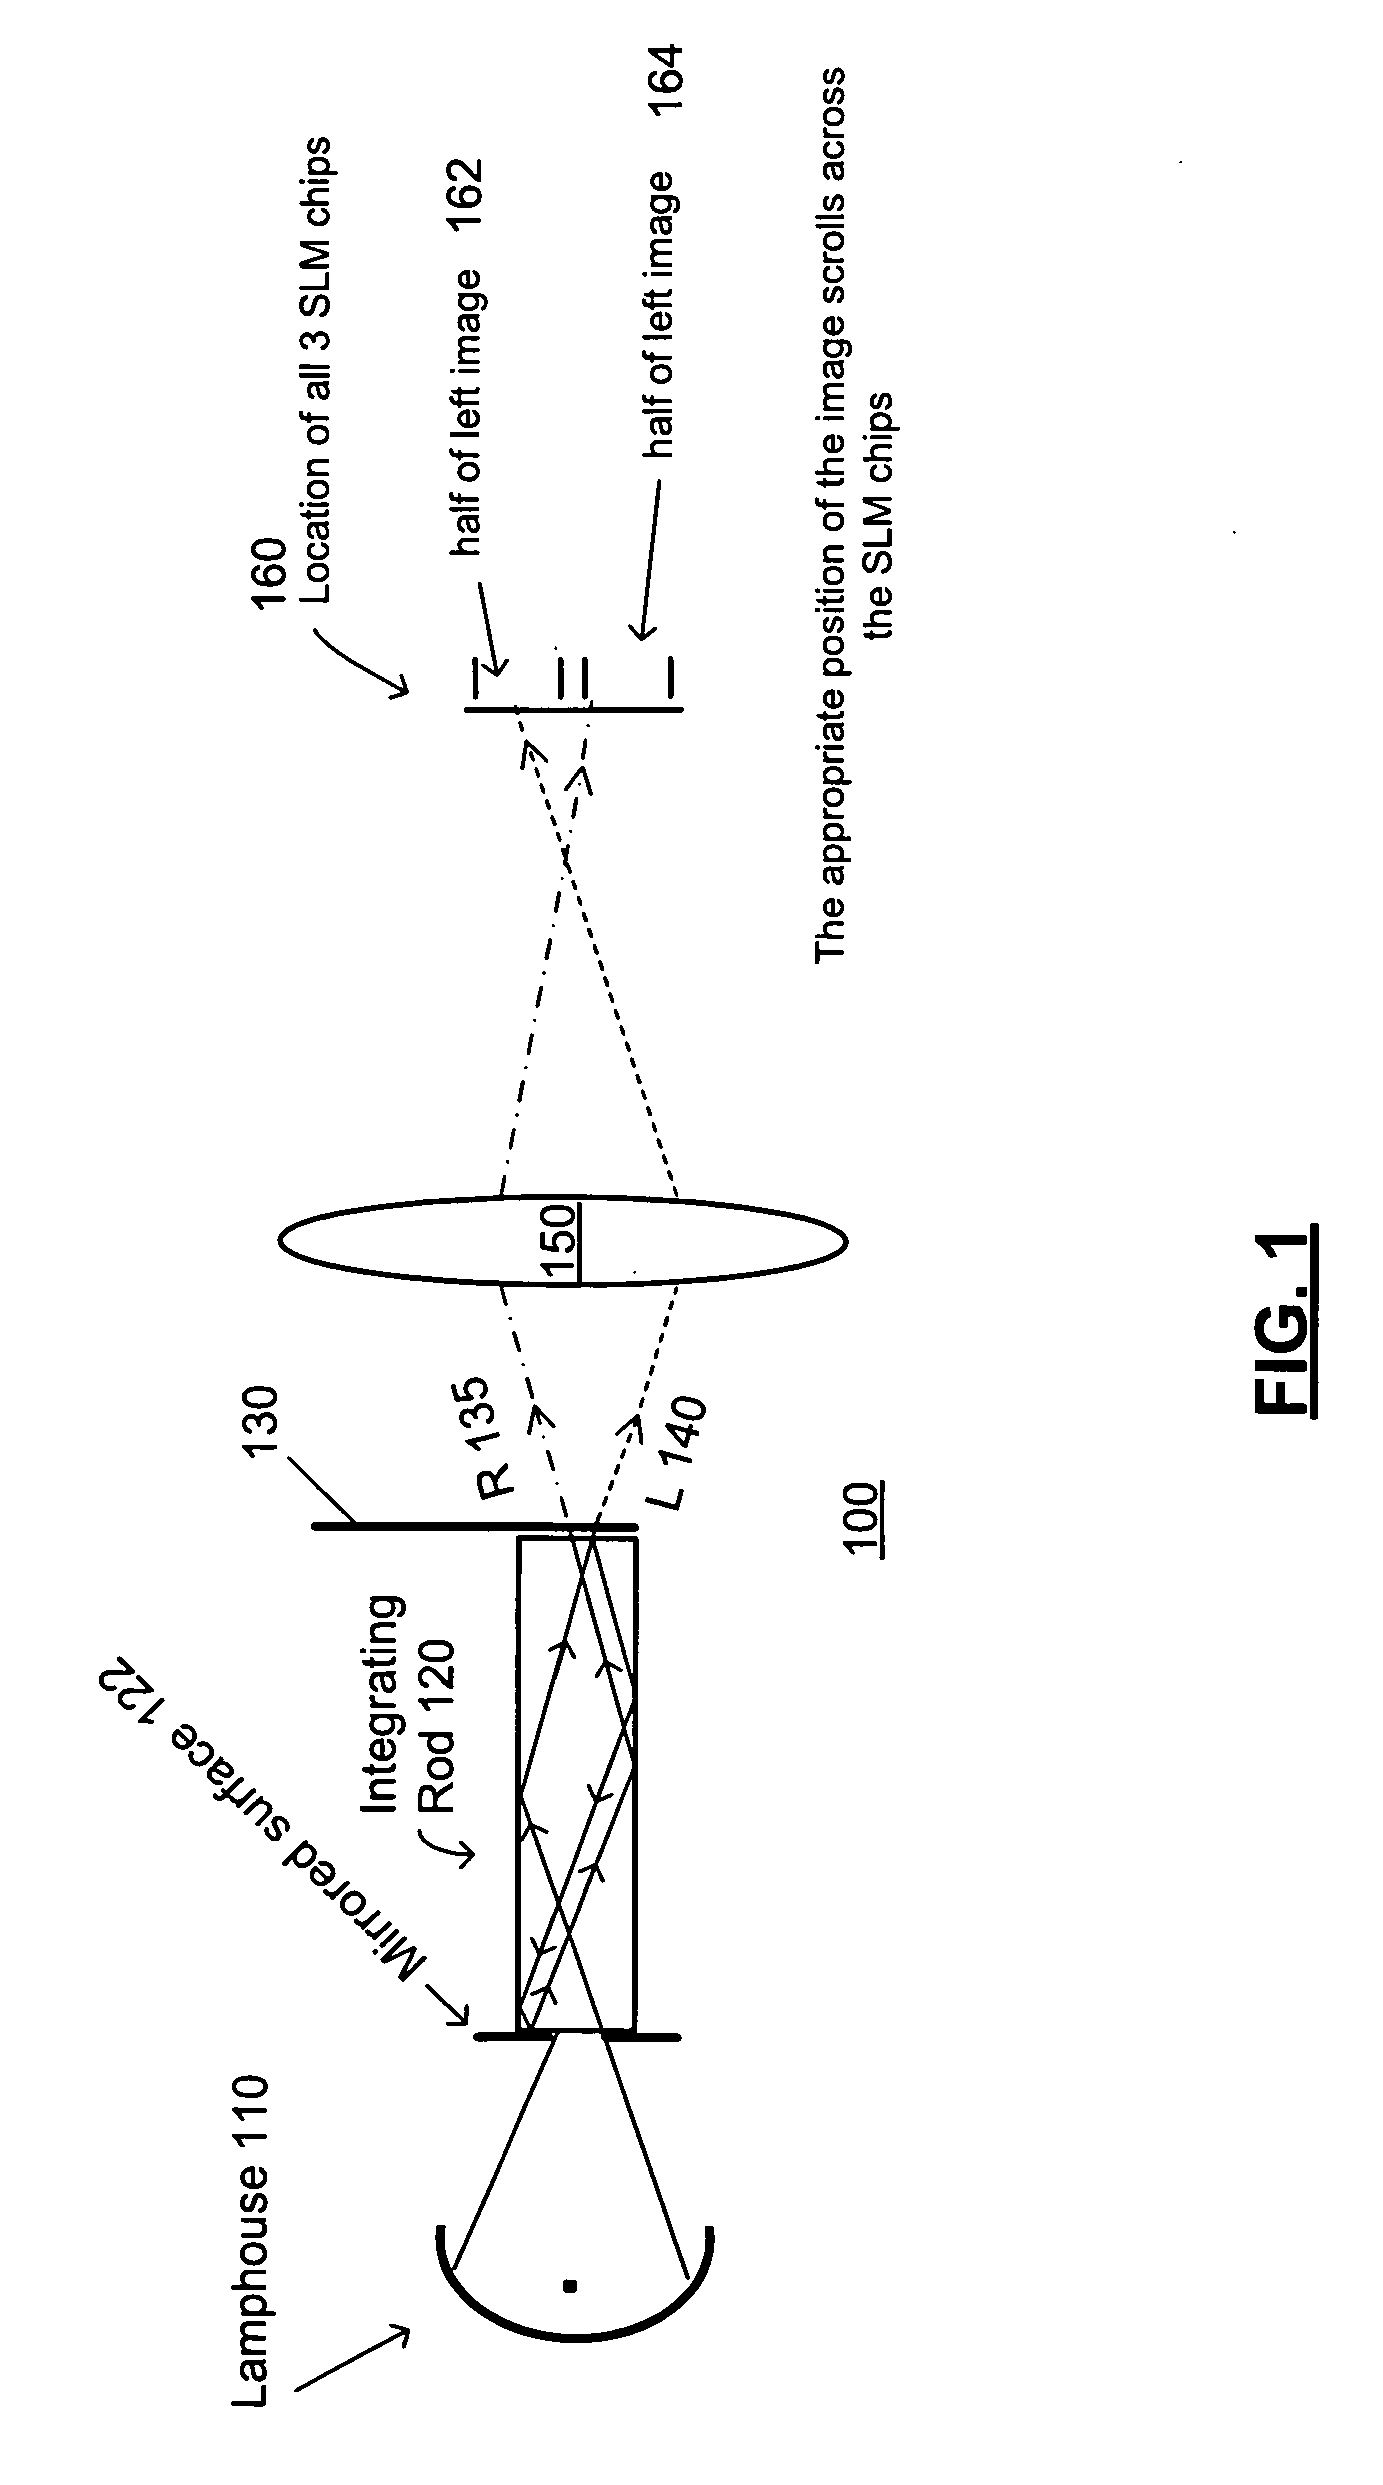 Method and apparatus for light recapture and sequential channel illumination